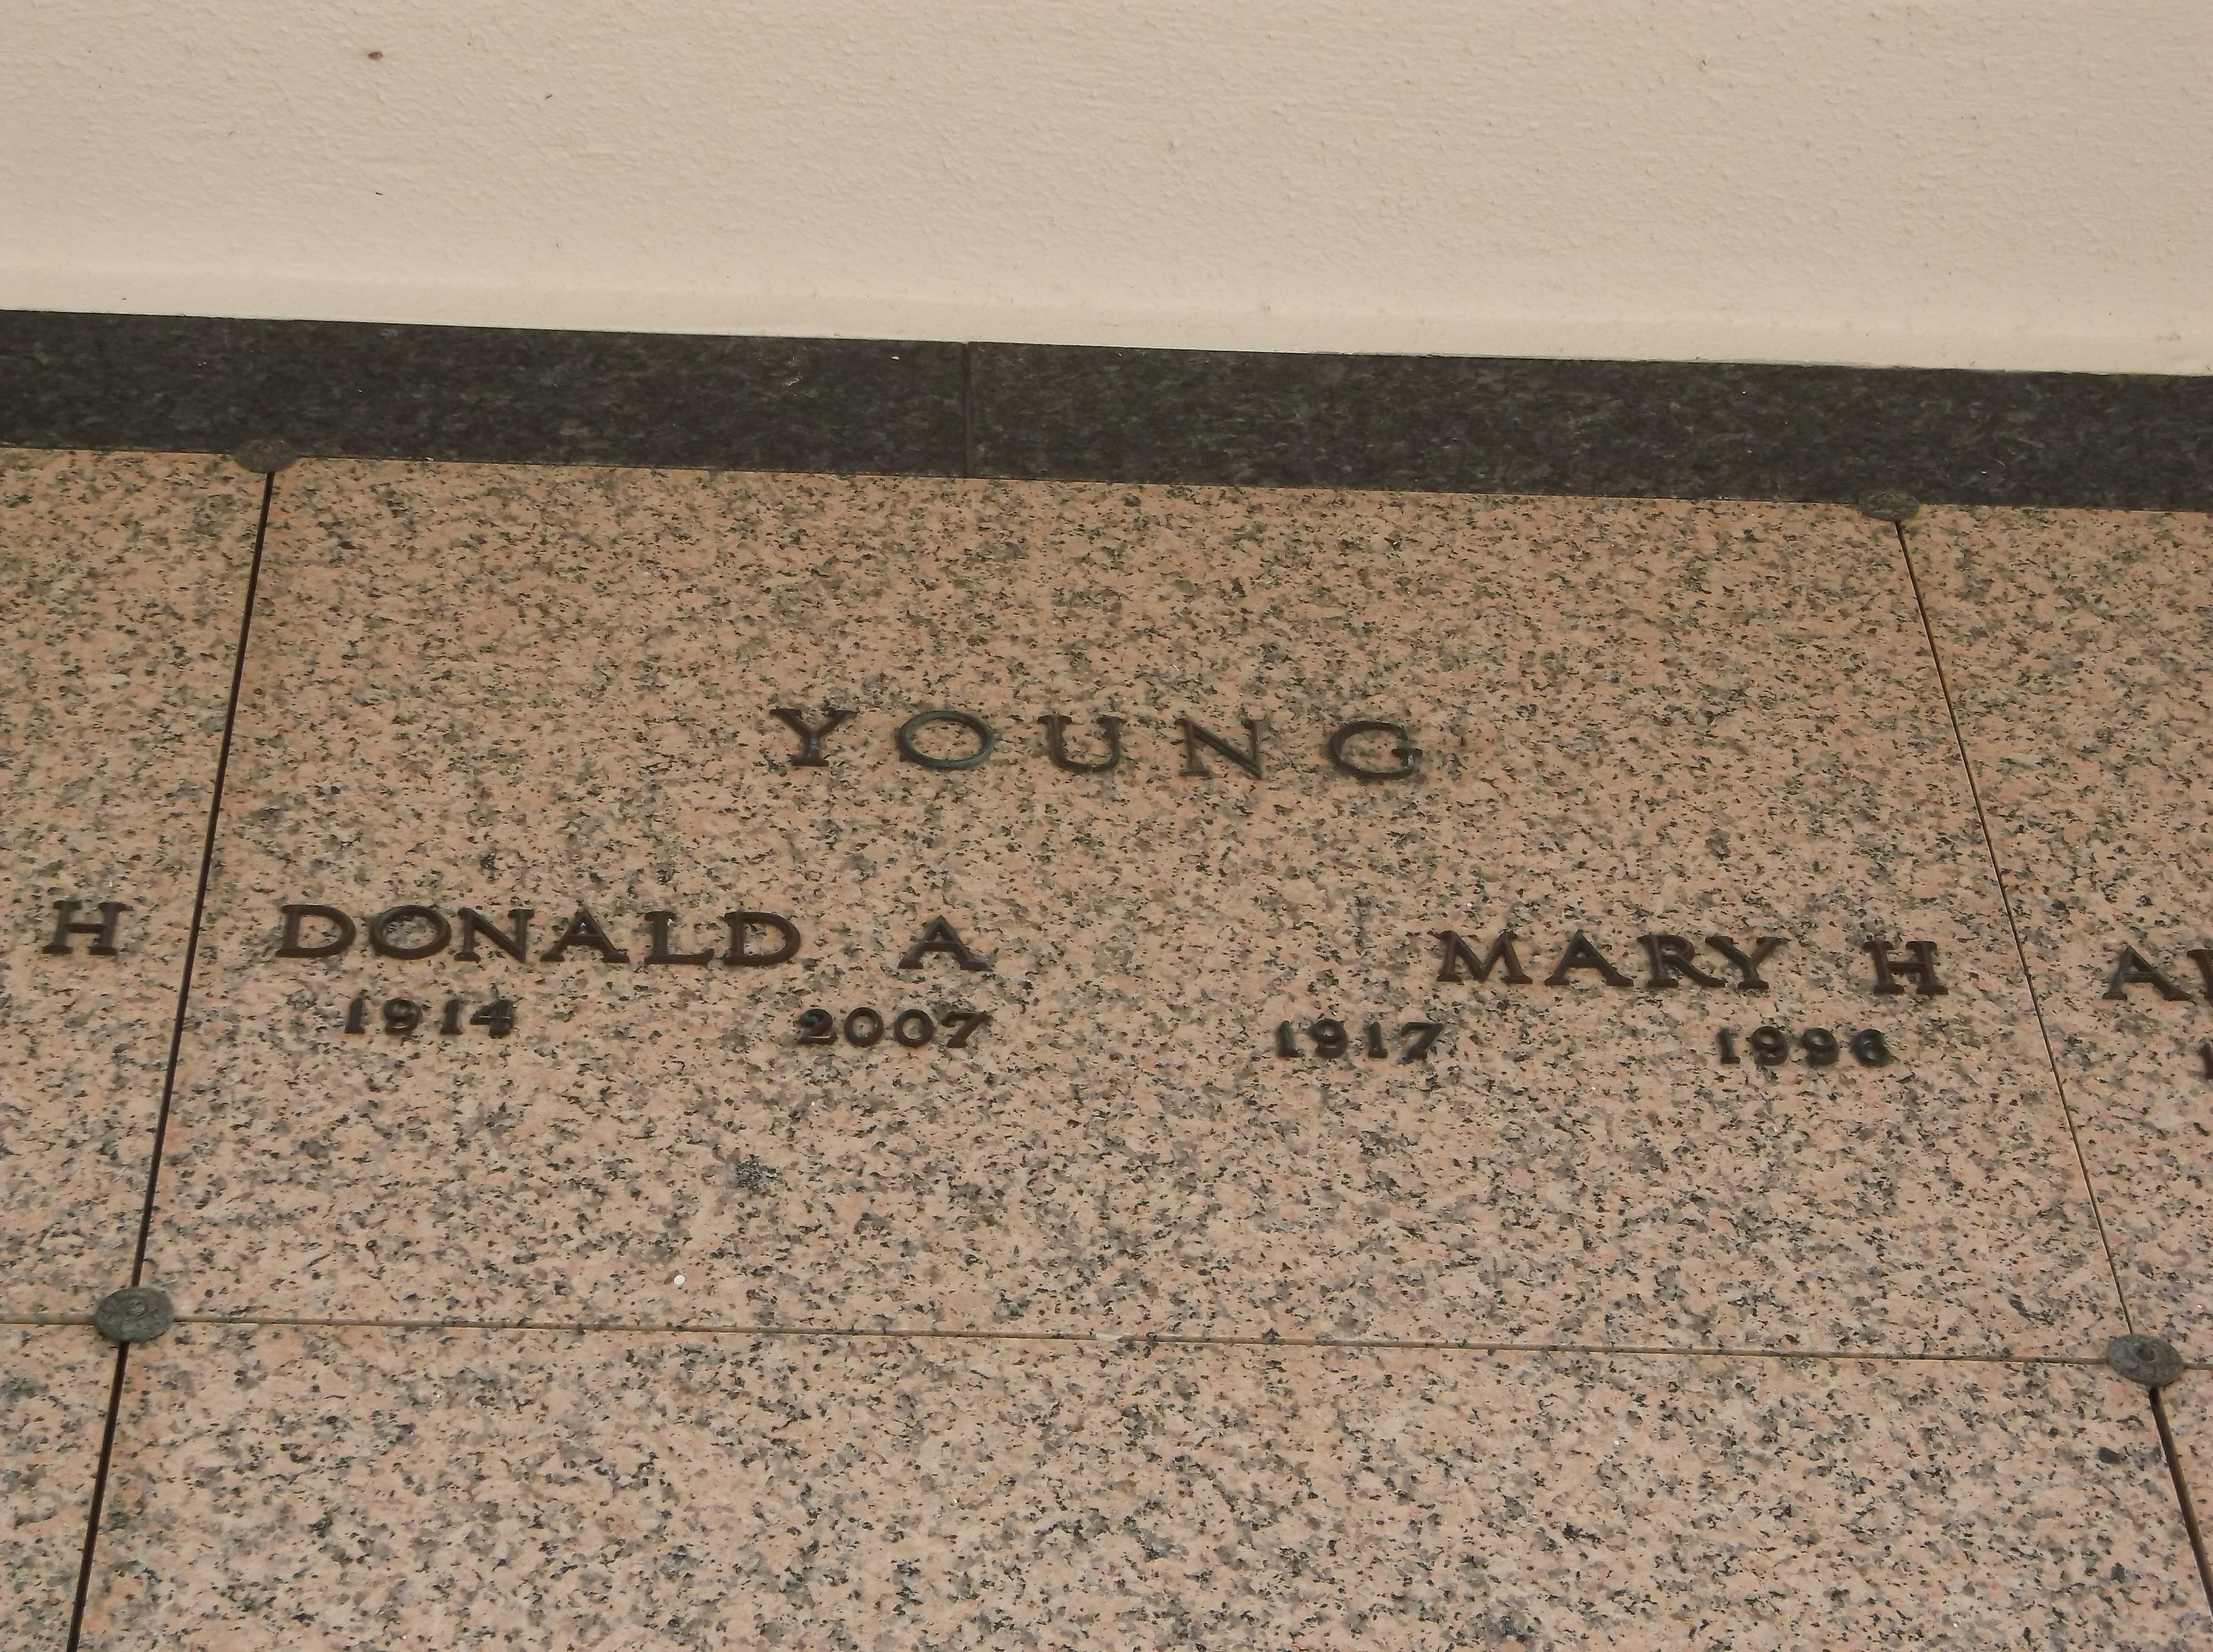 Donald A Young